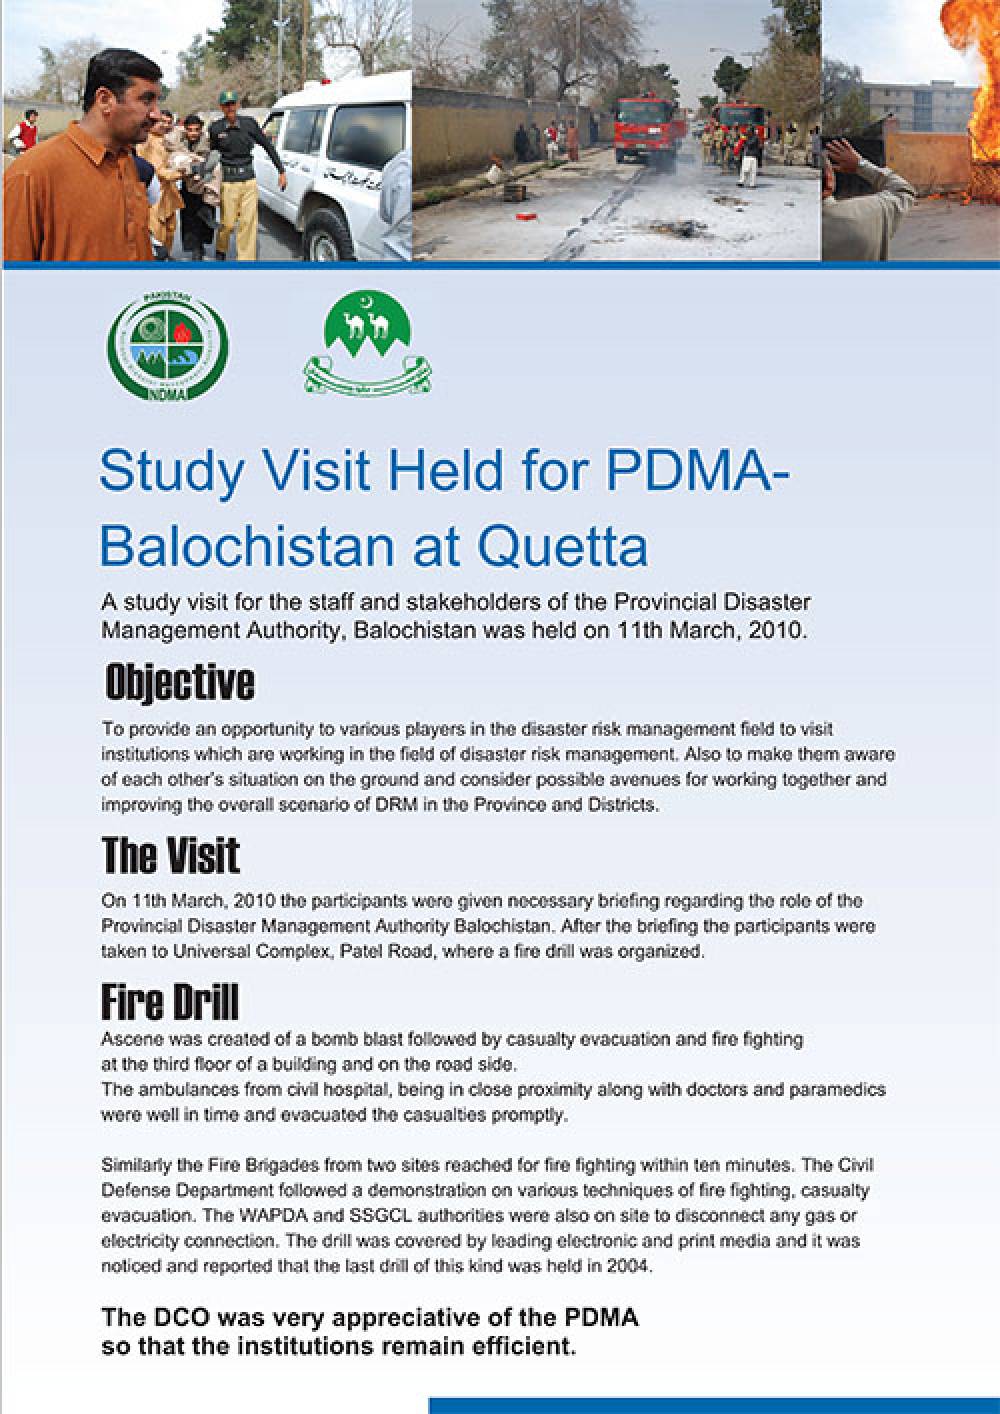 Study Visit held for PDMA-Balochistan at Quetta